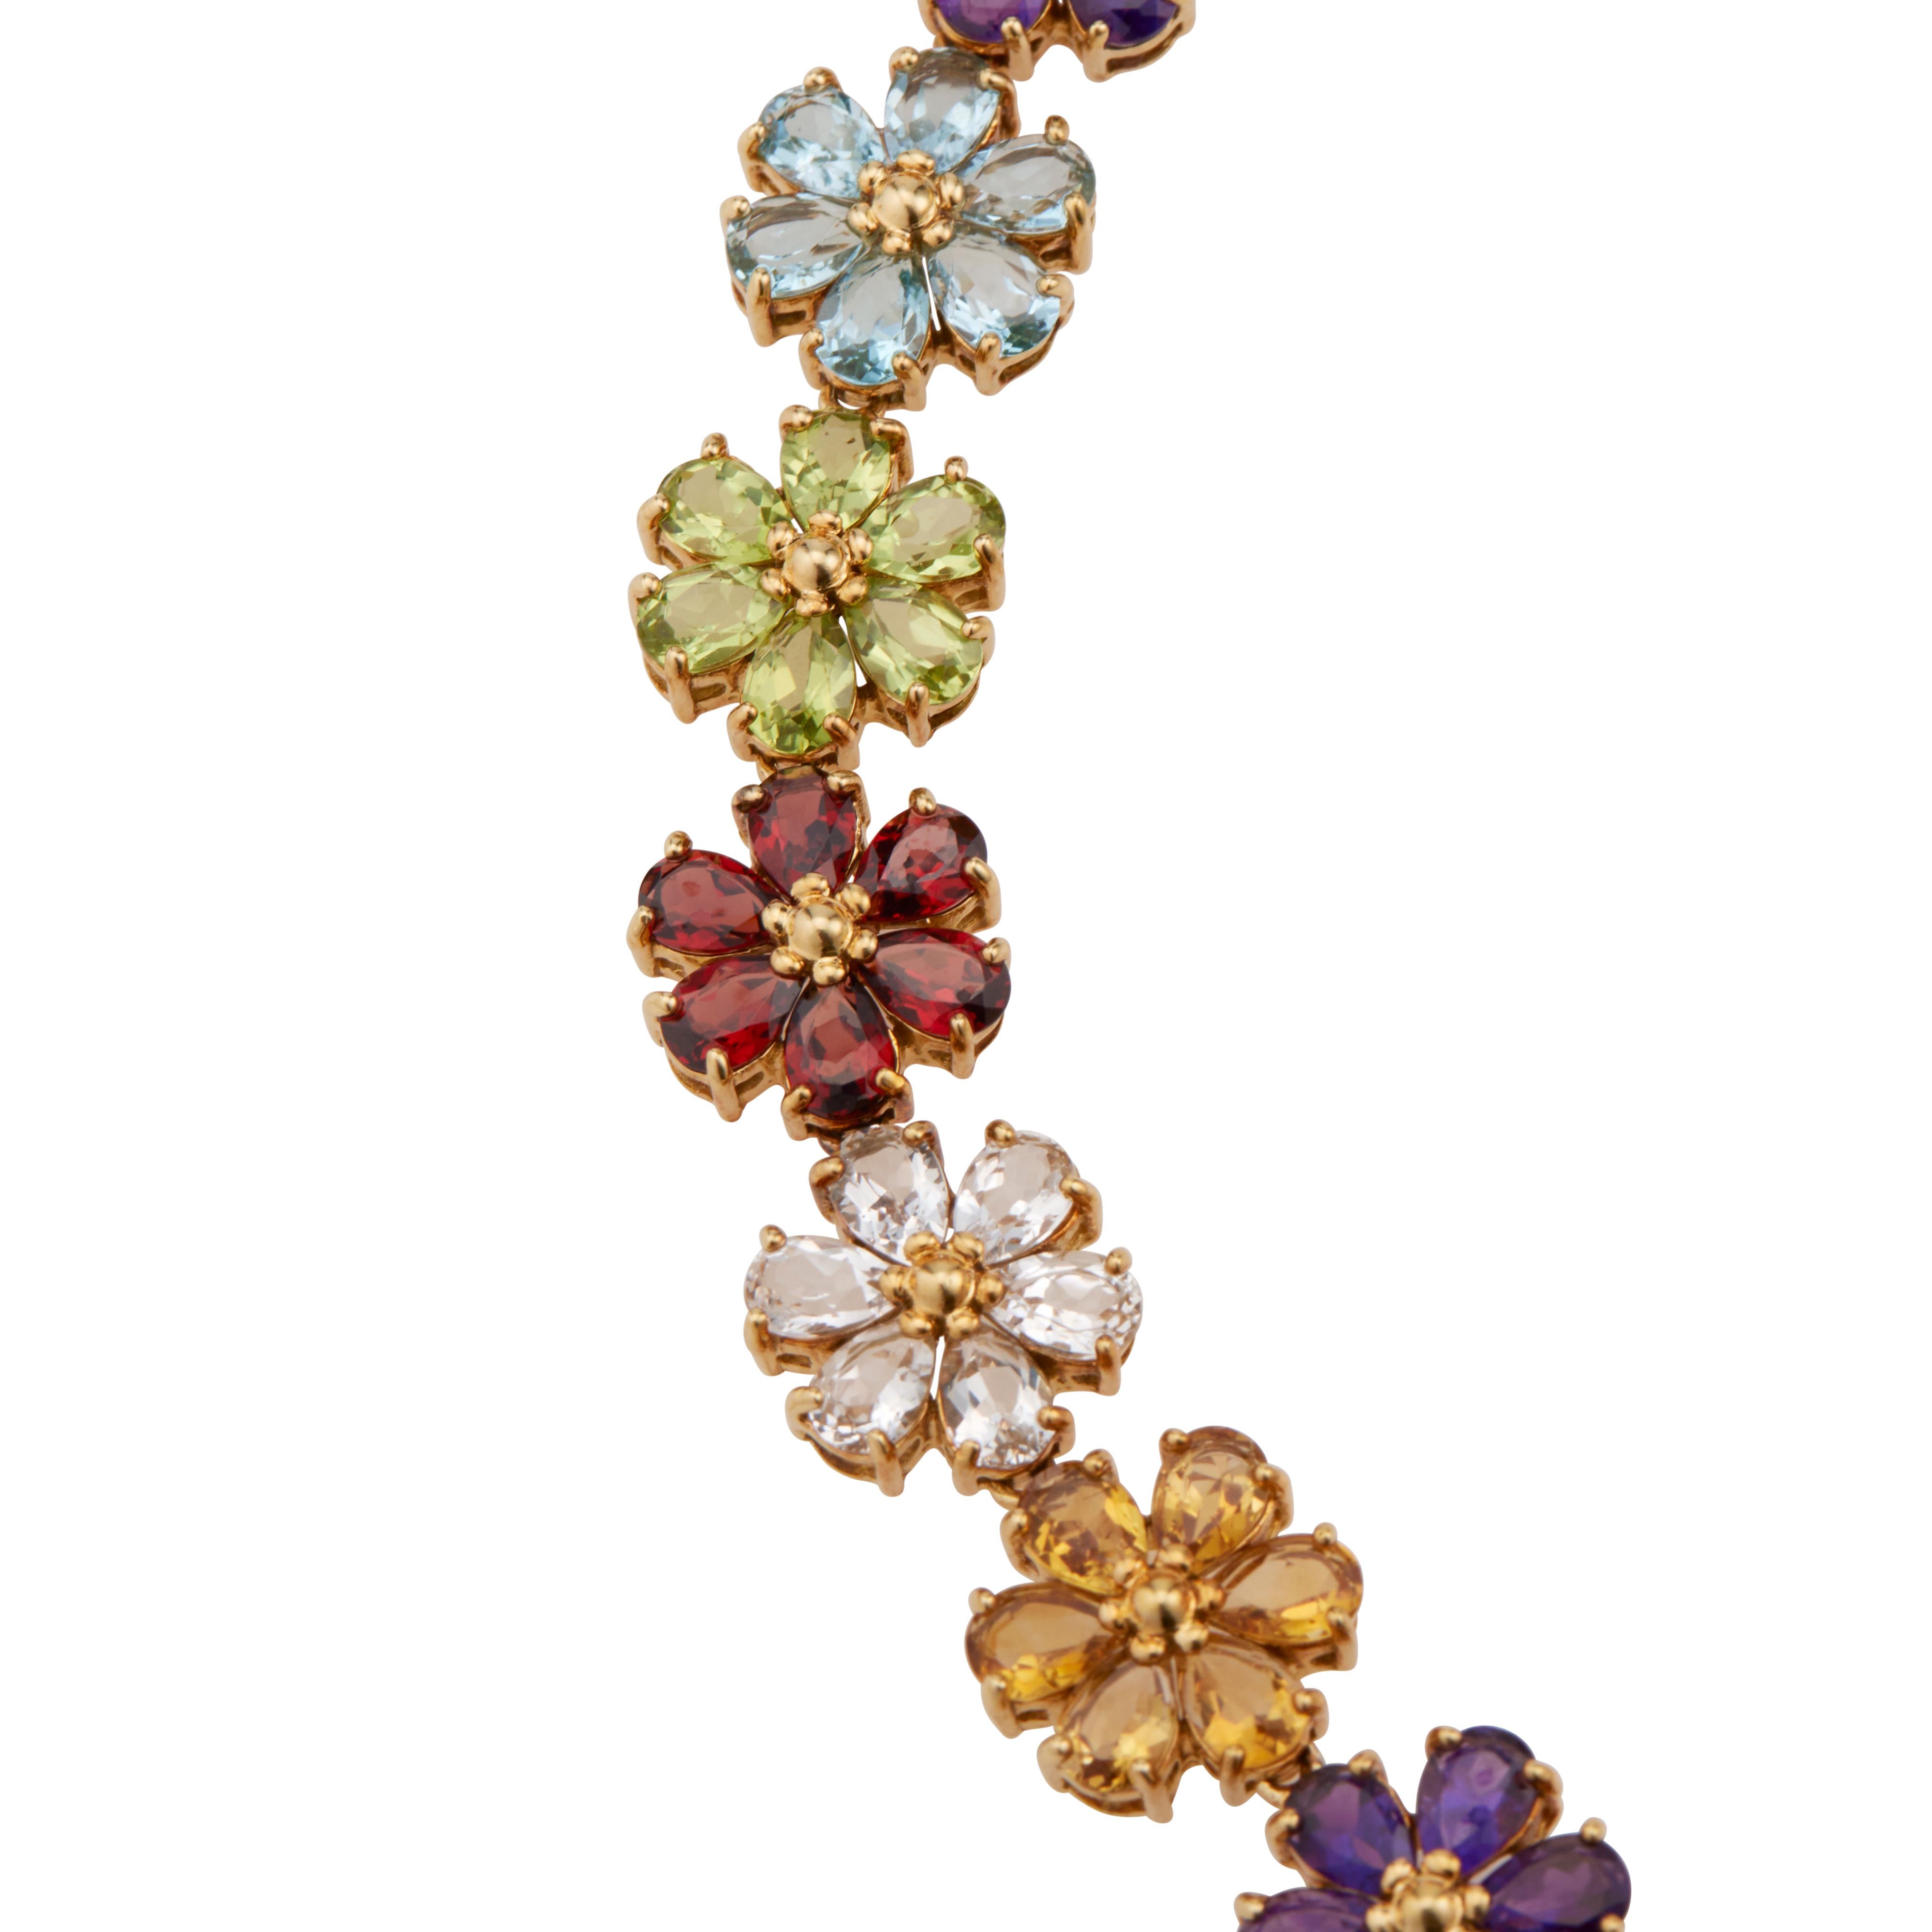 75.00 Carat Amethyst Citrine Topaz Garnet Peridot Flower Gold Necklace In Excellent Condition For Sale In Stamford, CT